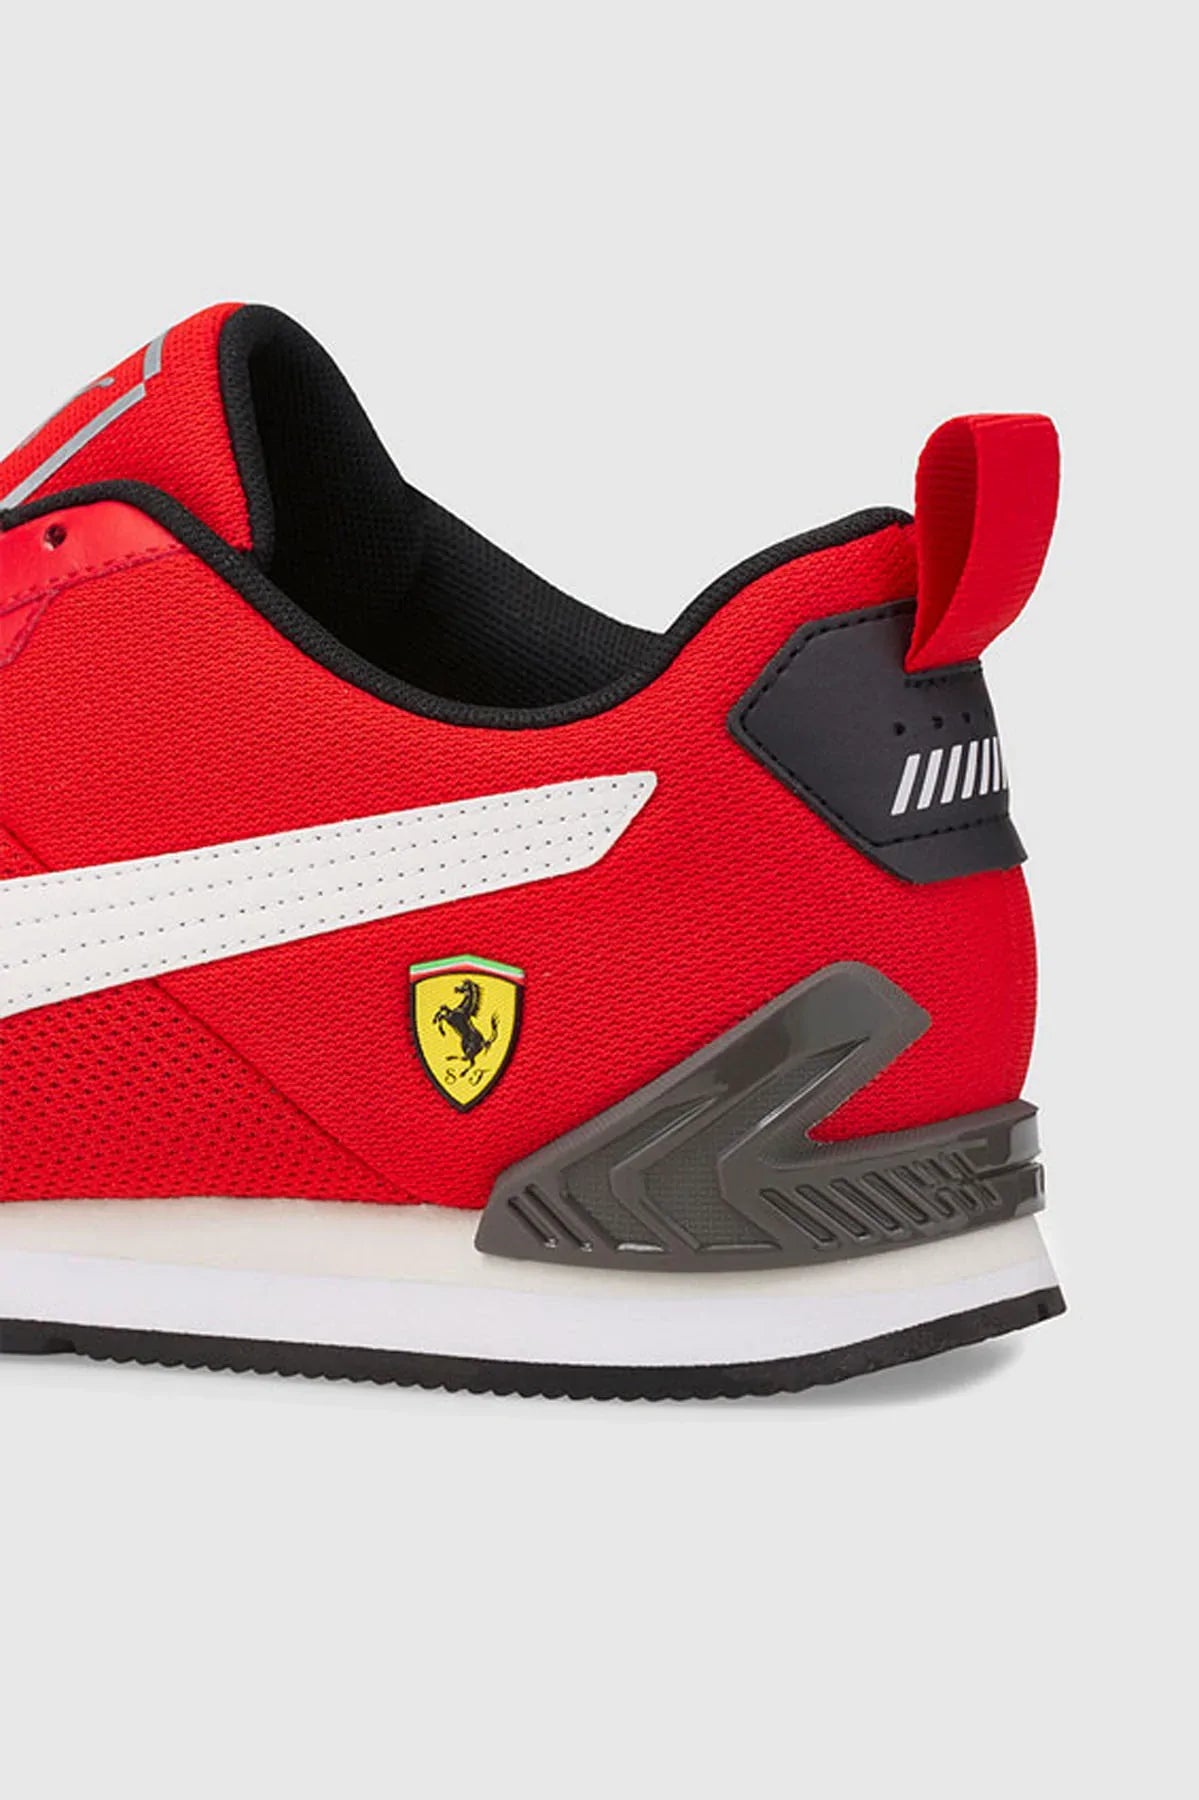 Ferrari Track Racer Rosso Lifestyle Shoes